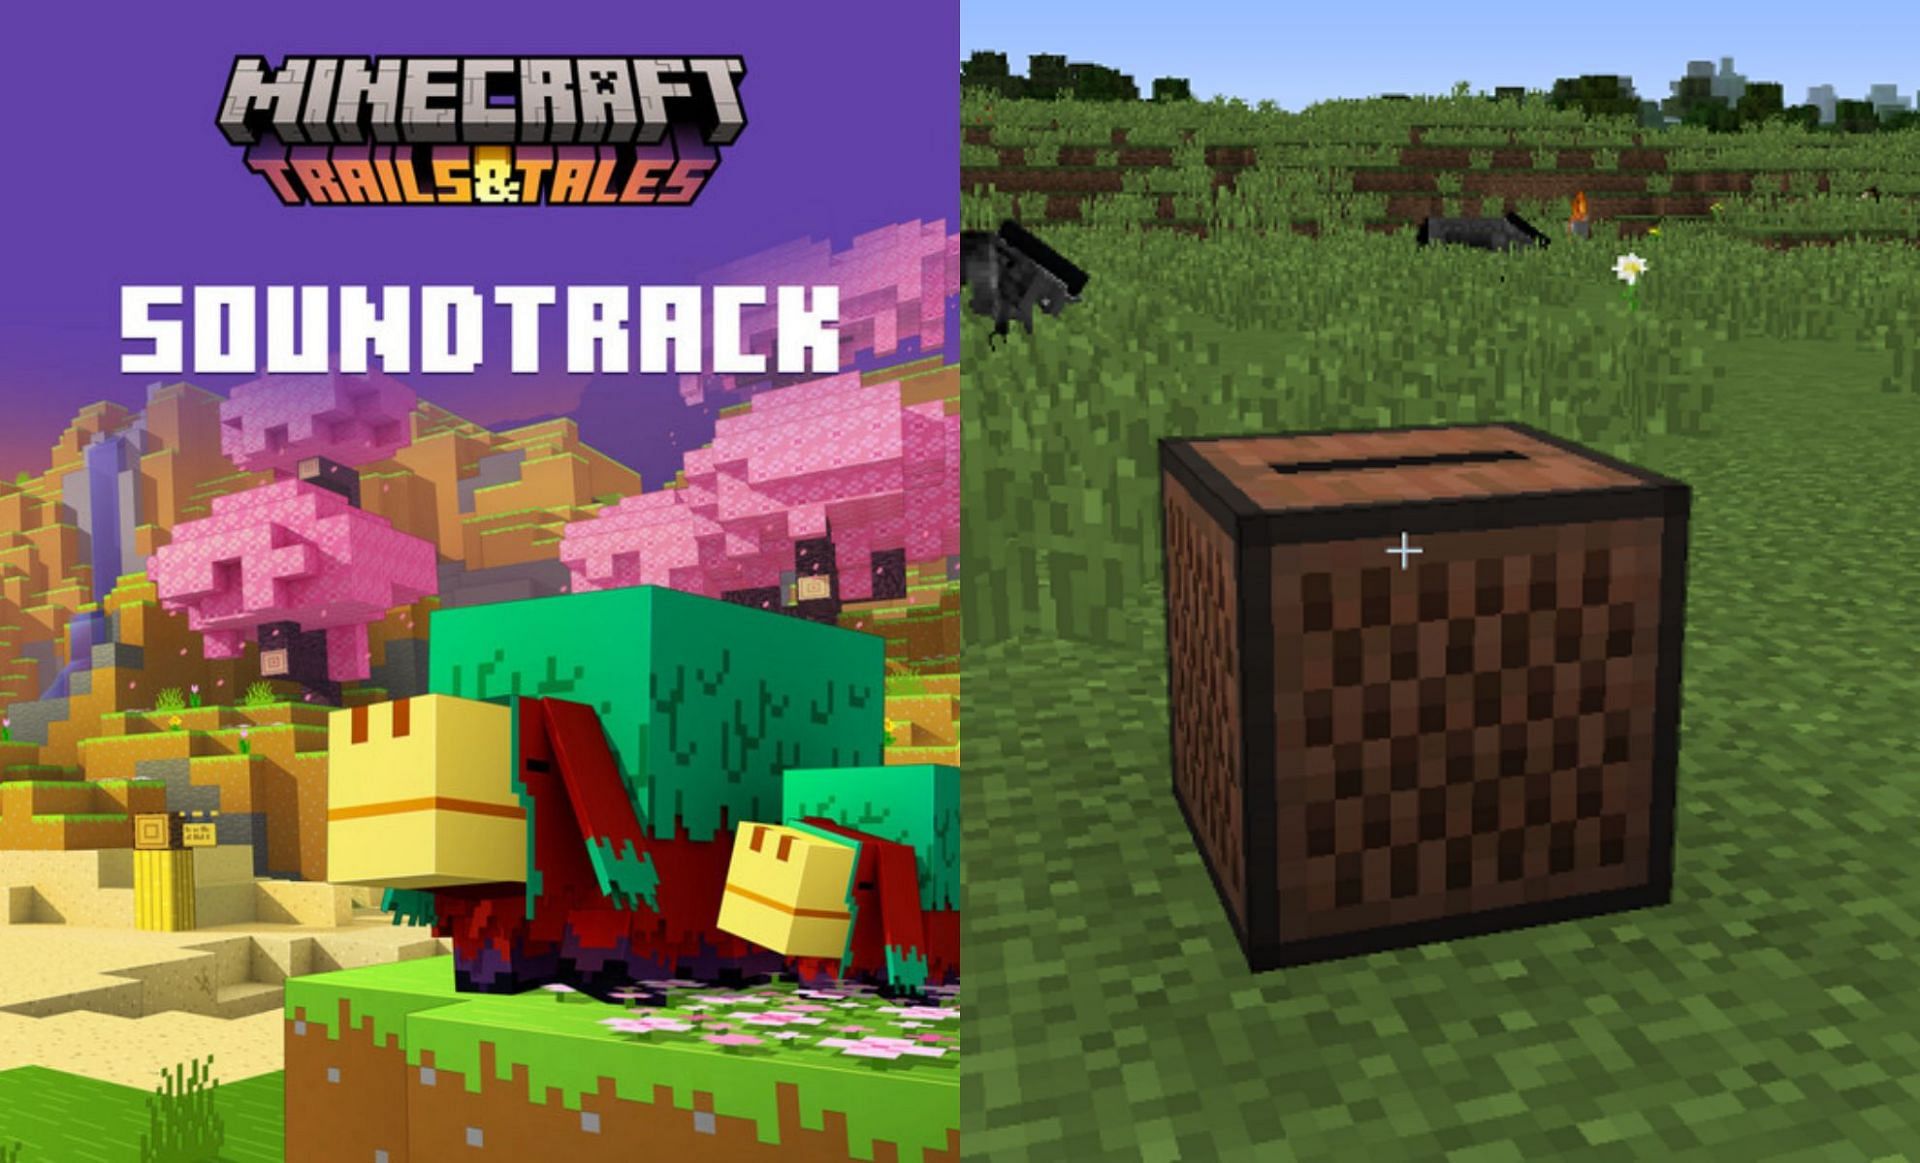 The Minecraft soundtrack received an update (Image via Mojang)